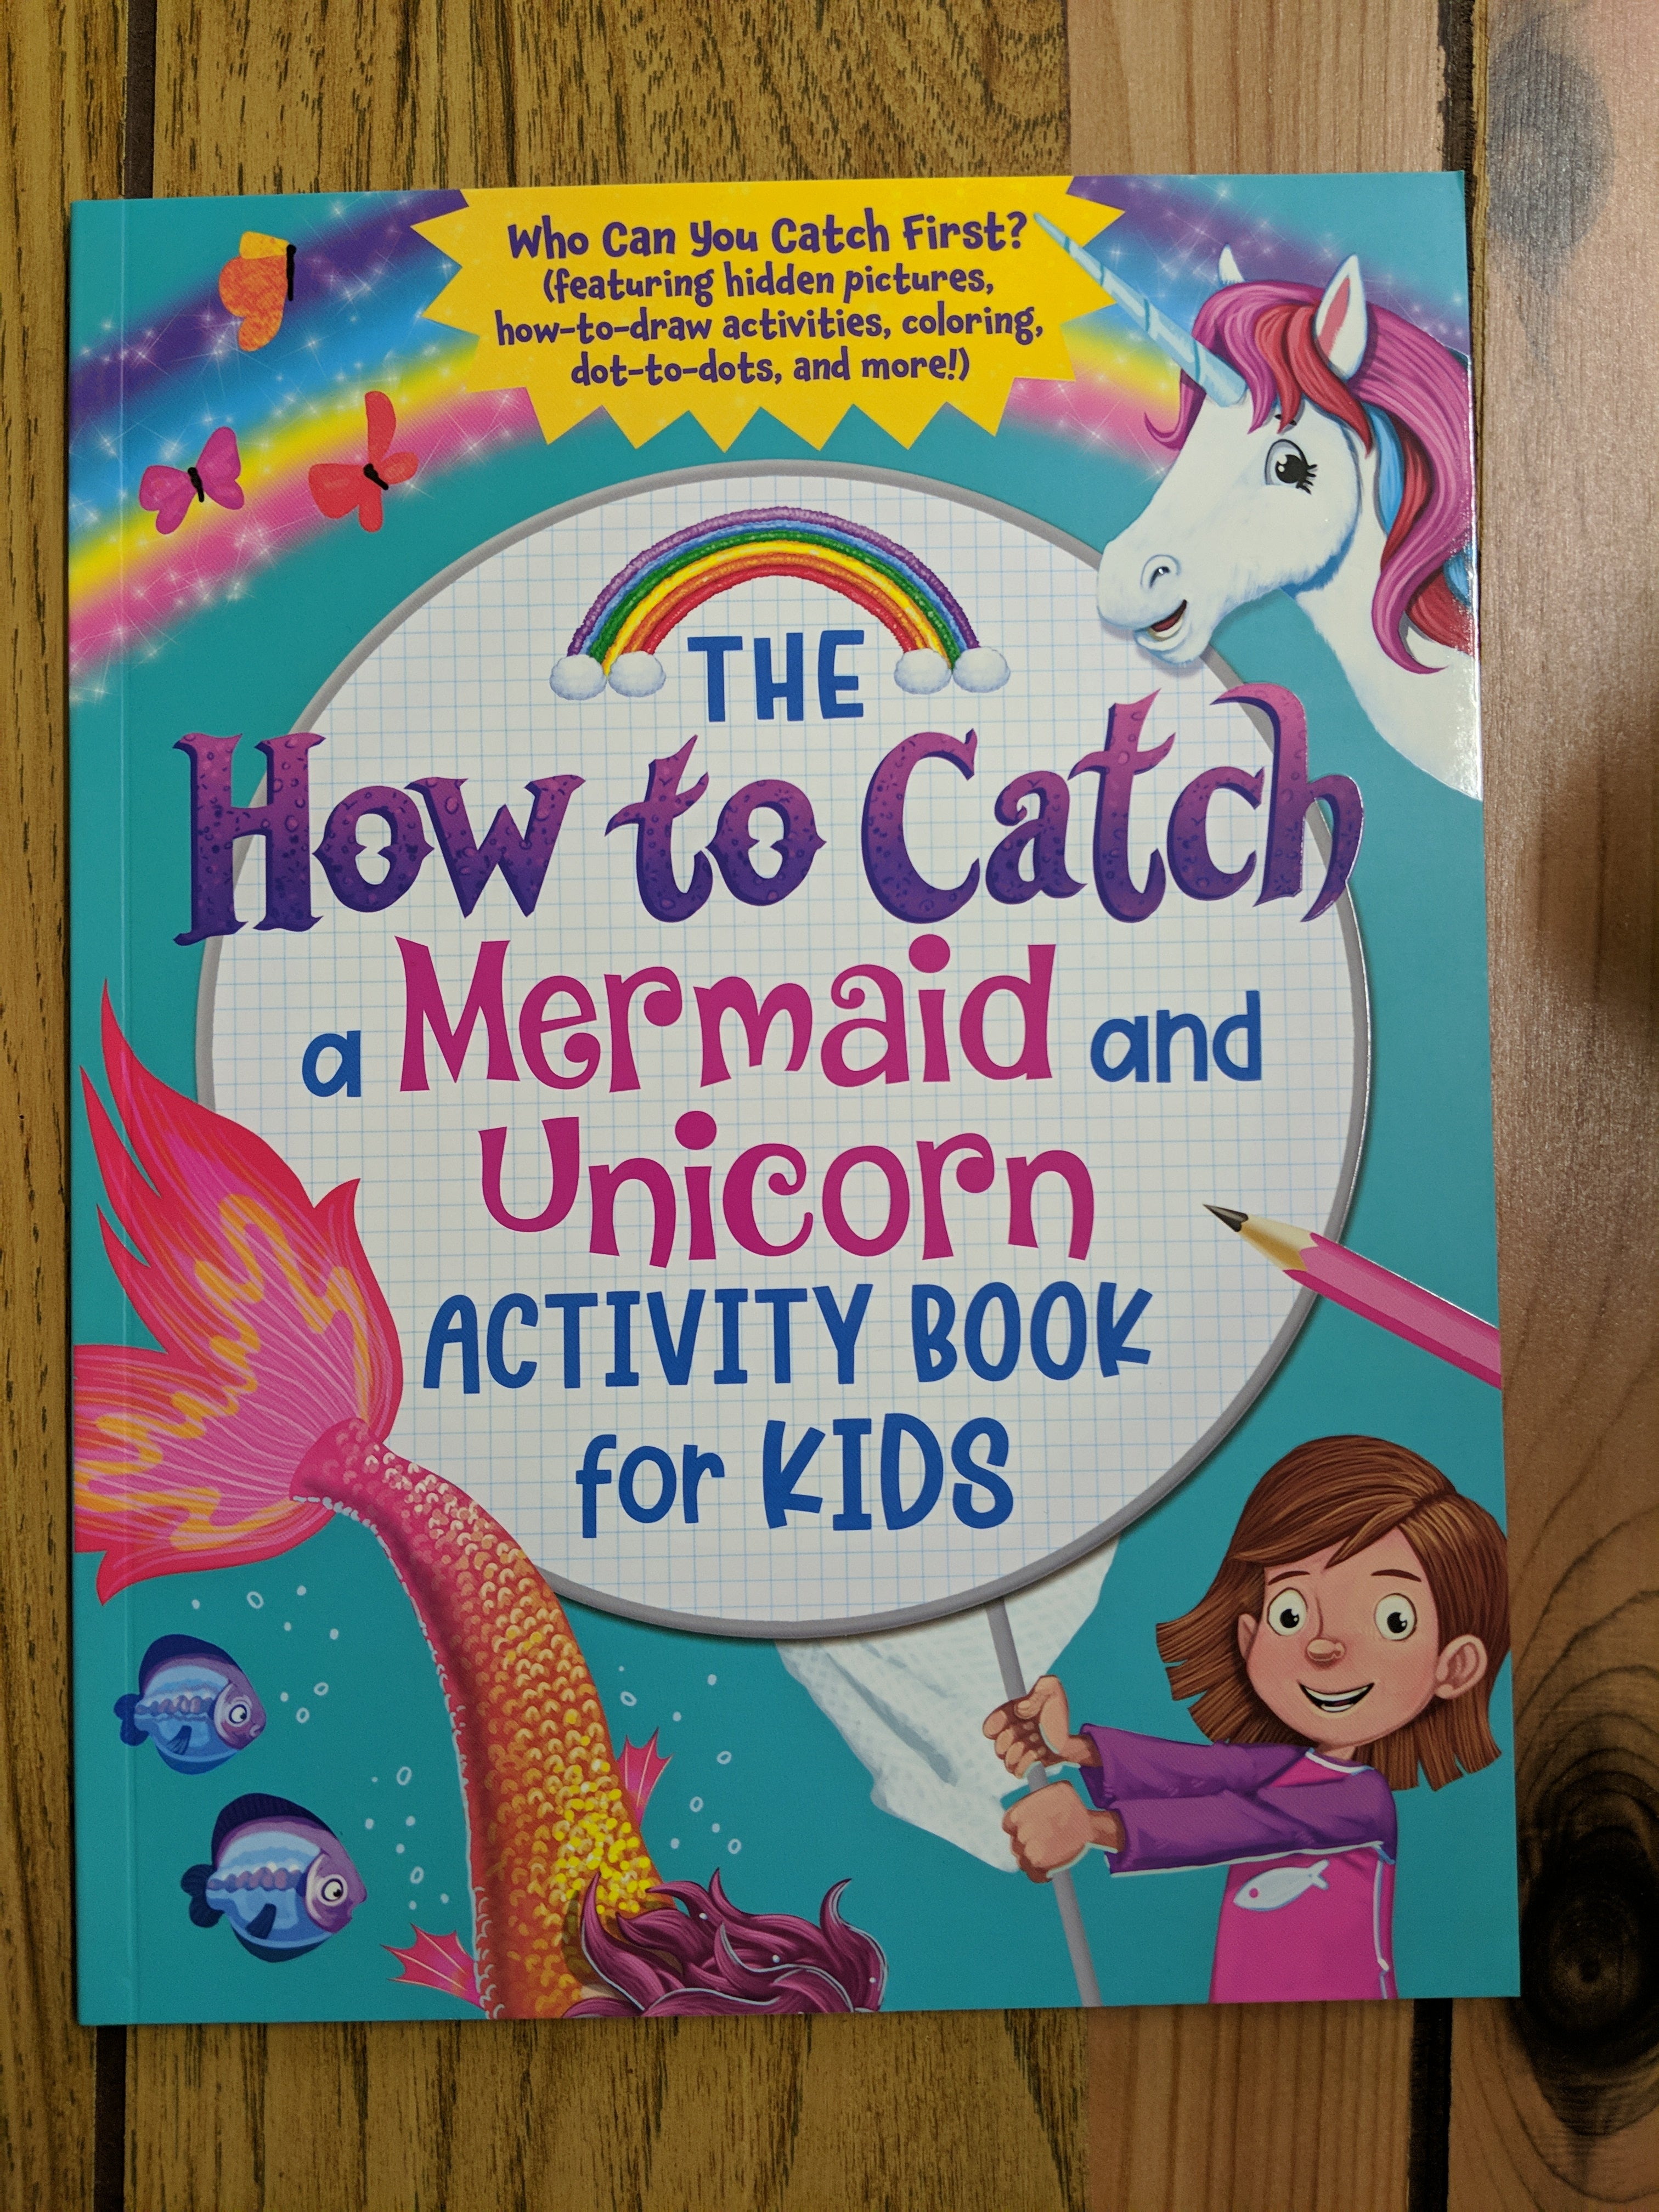 Kids　The　Comics　How　Activity　–　a　Unicorn　for　to　Catch　Book　and　Mermaid　Books　and　Lucky's